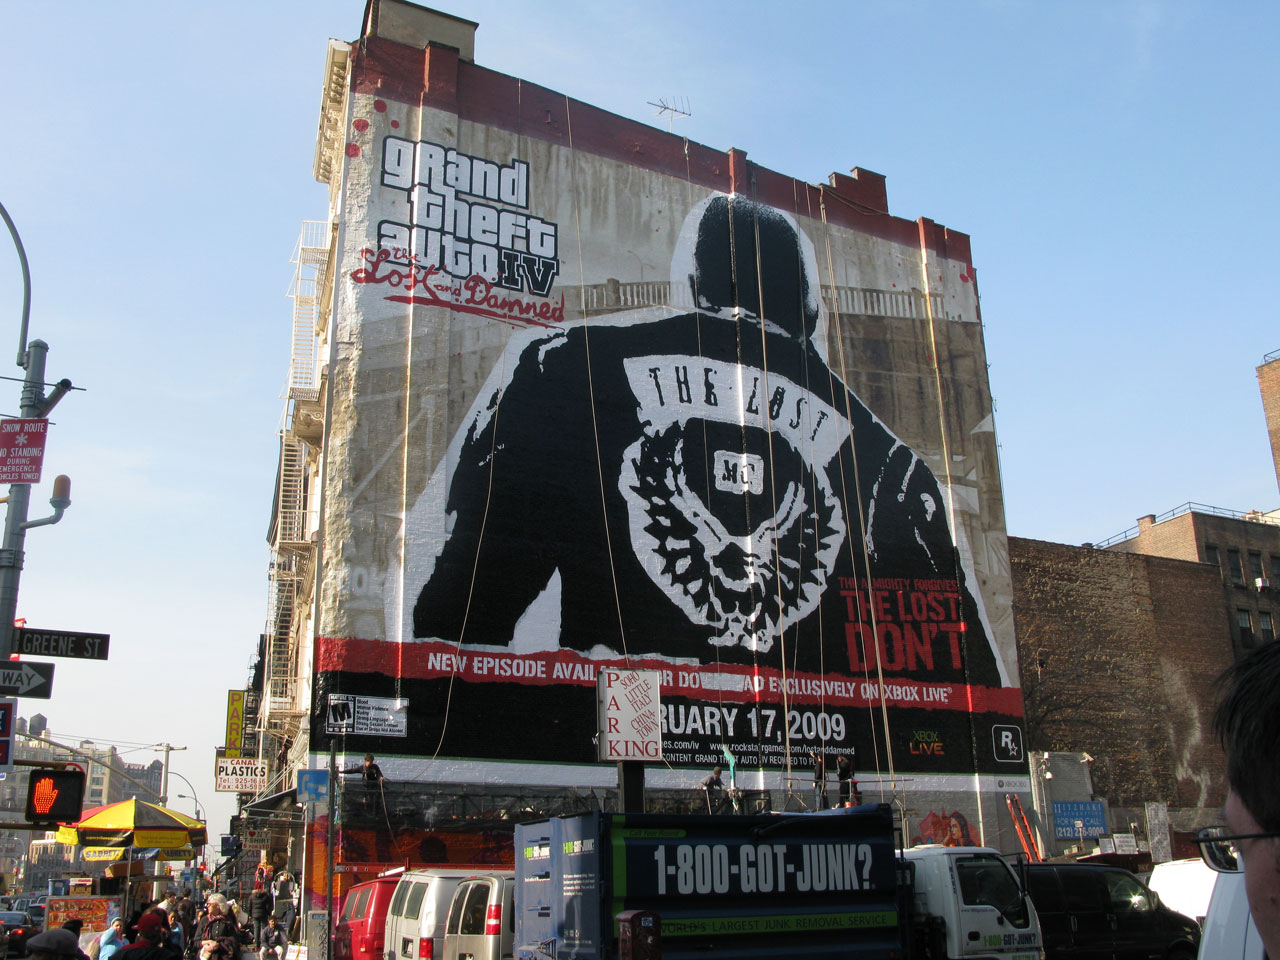 5697-gta-iv-the-lost-and-damned-event.jpg